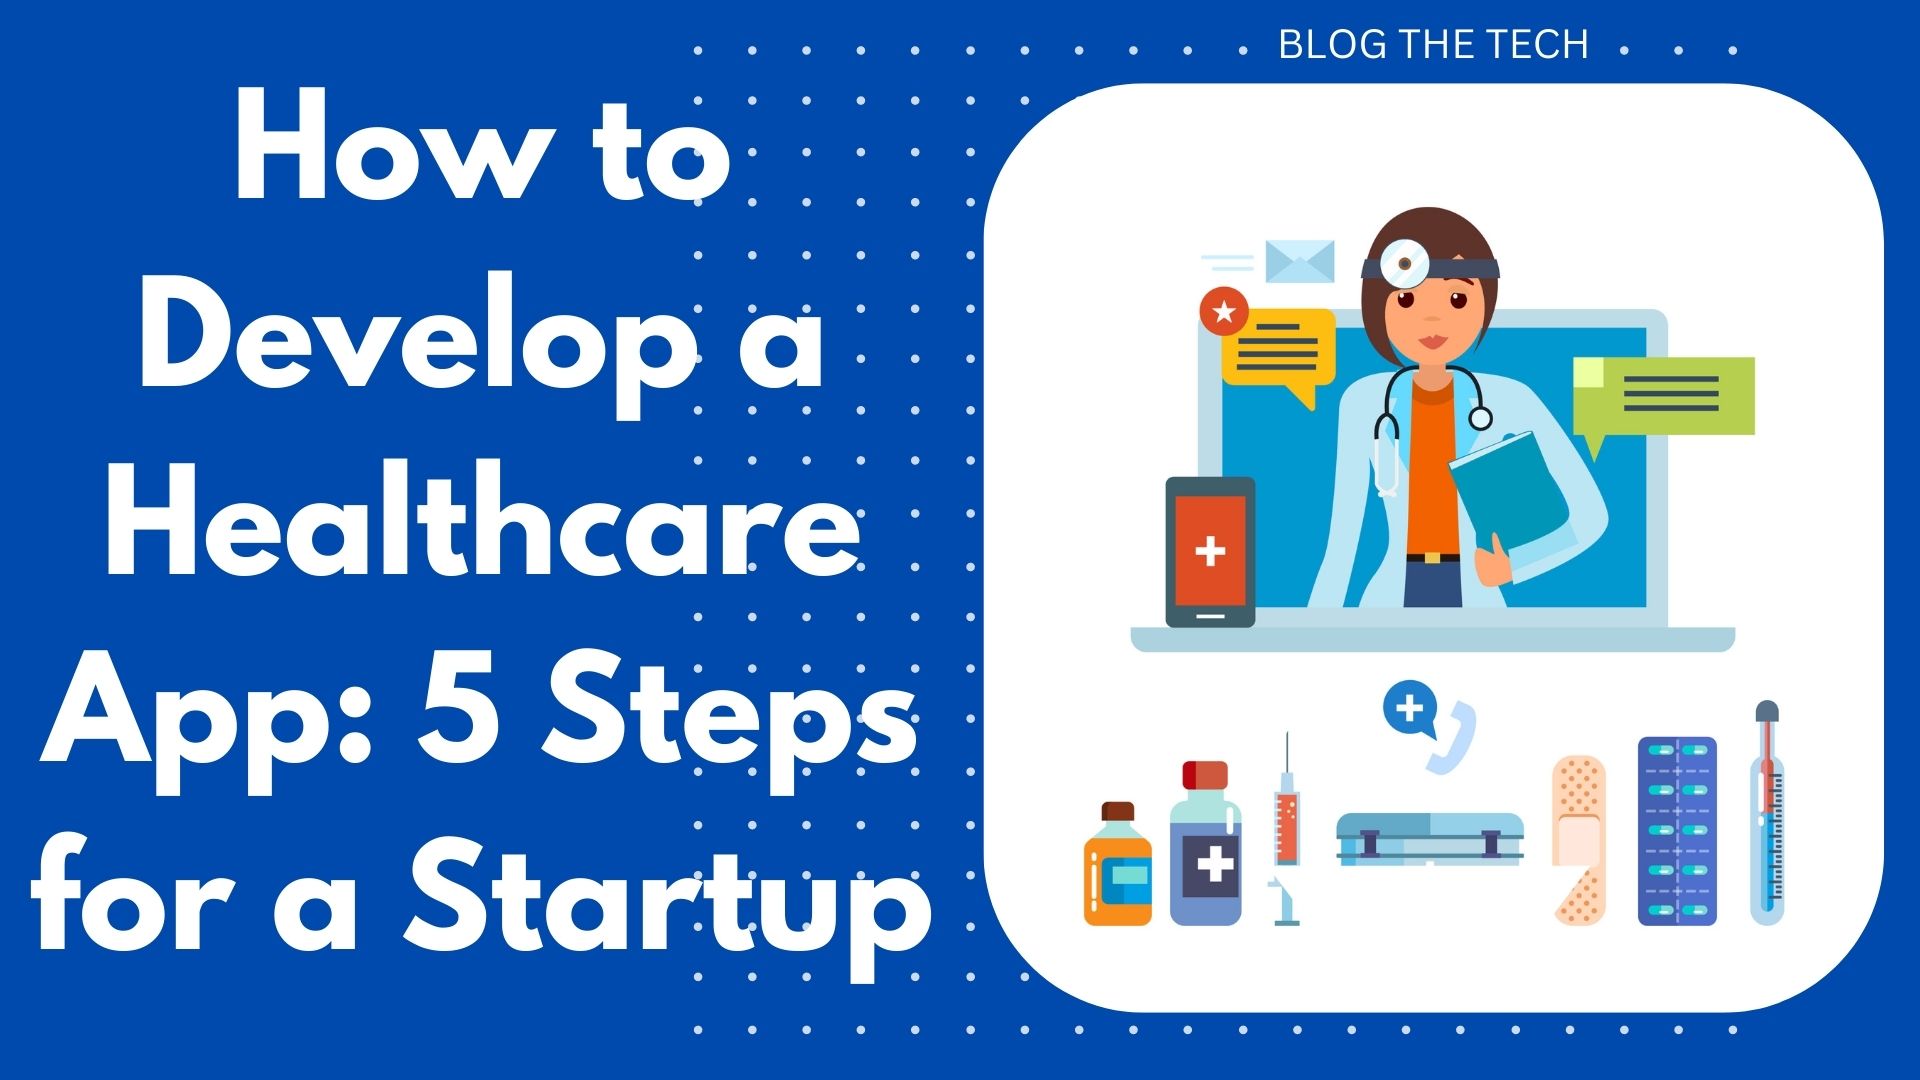 How to Develop a Healthcare App: 5 Steps for a Startup